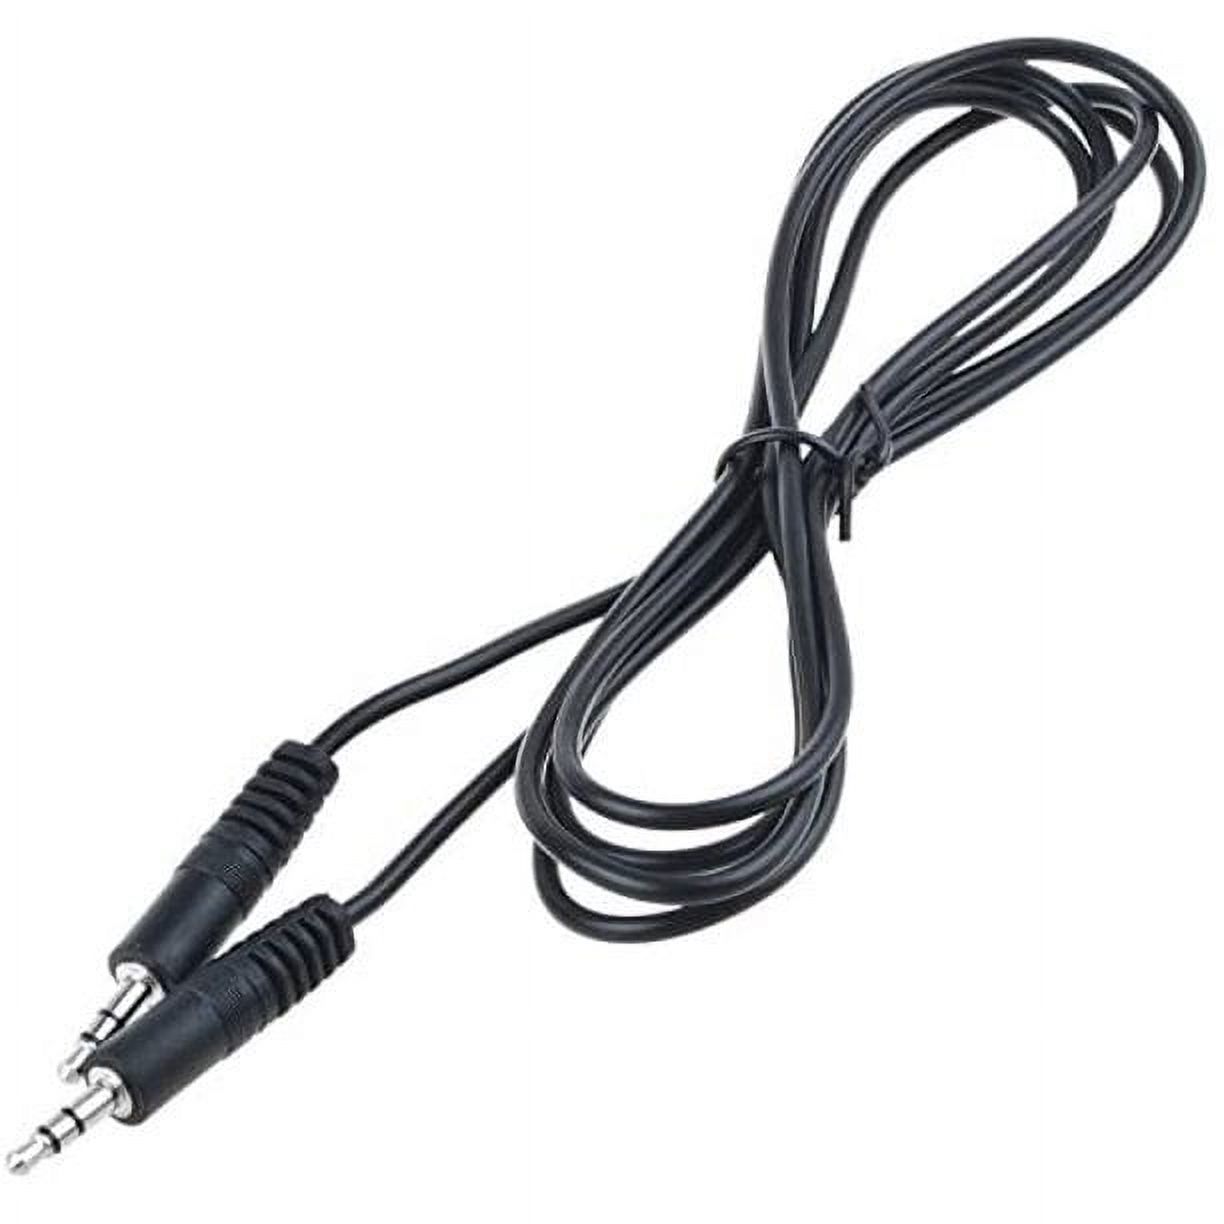 UPBRIGHT AUX IN Audio RCA Cable Cord For VIZIO 29" 32??38" 40" 42" Home Theater Sound Bar Wireless Subwoofer SoundBar Speaker (To Convert AUX Input stereo audio plug into two mono RCA plugs ) - image 2 of 5